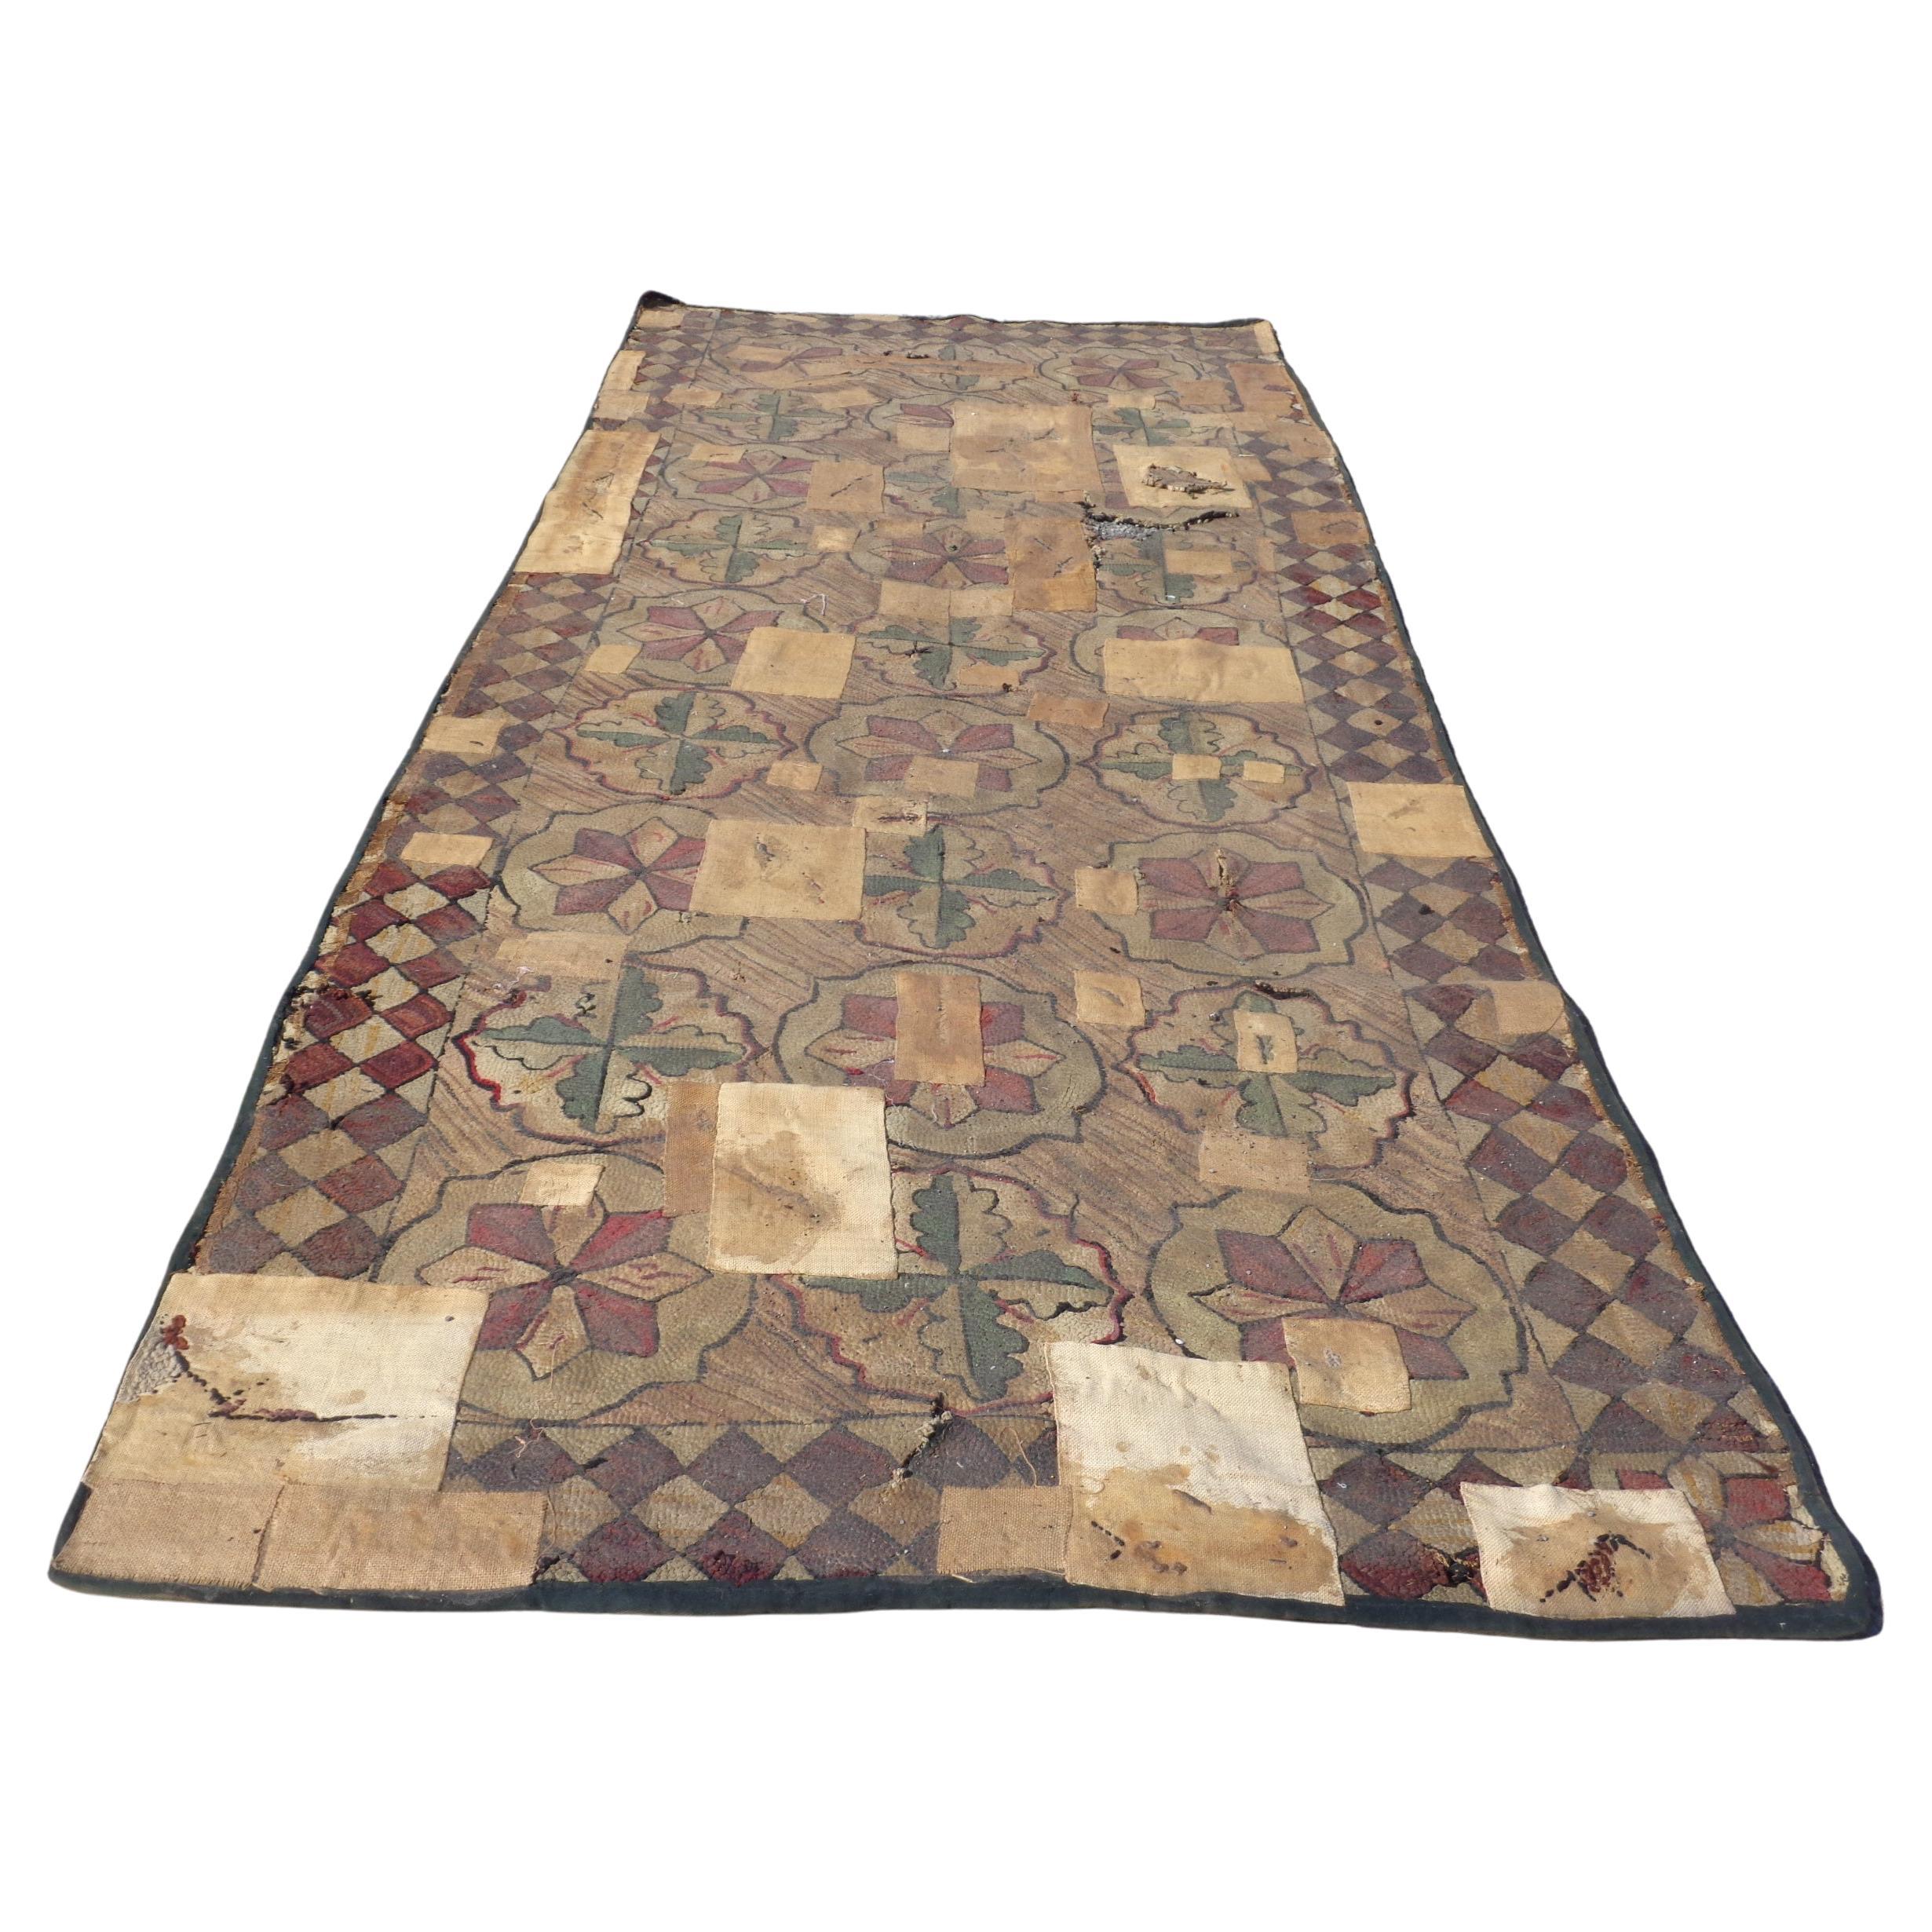 Antique American Hand Woven Hooked Rug Long Runner, Circa 1880-1900 For Sale 1